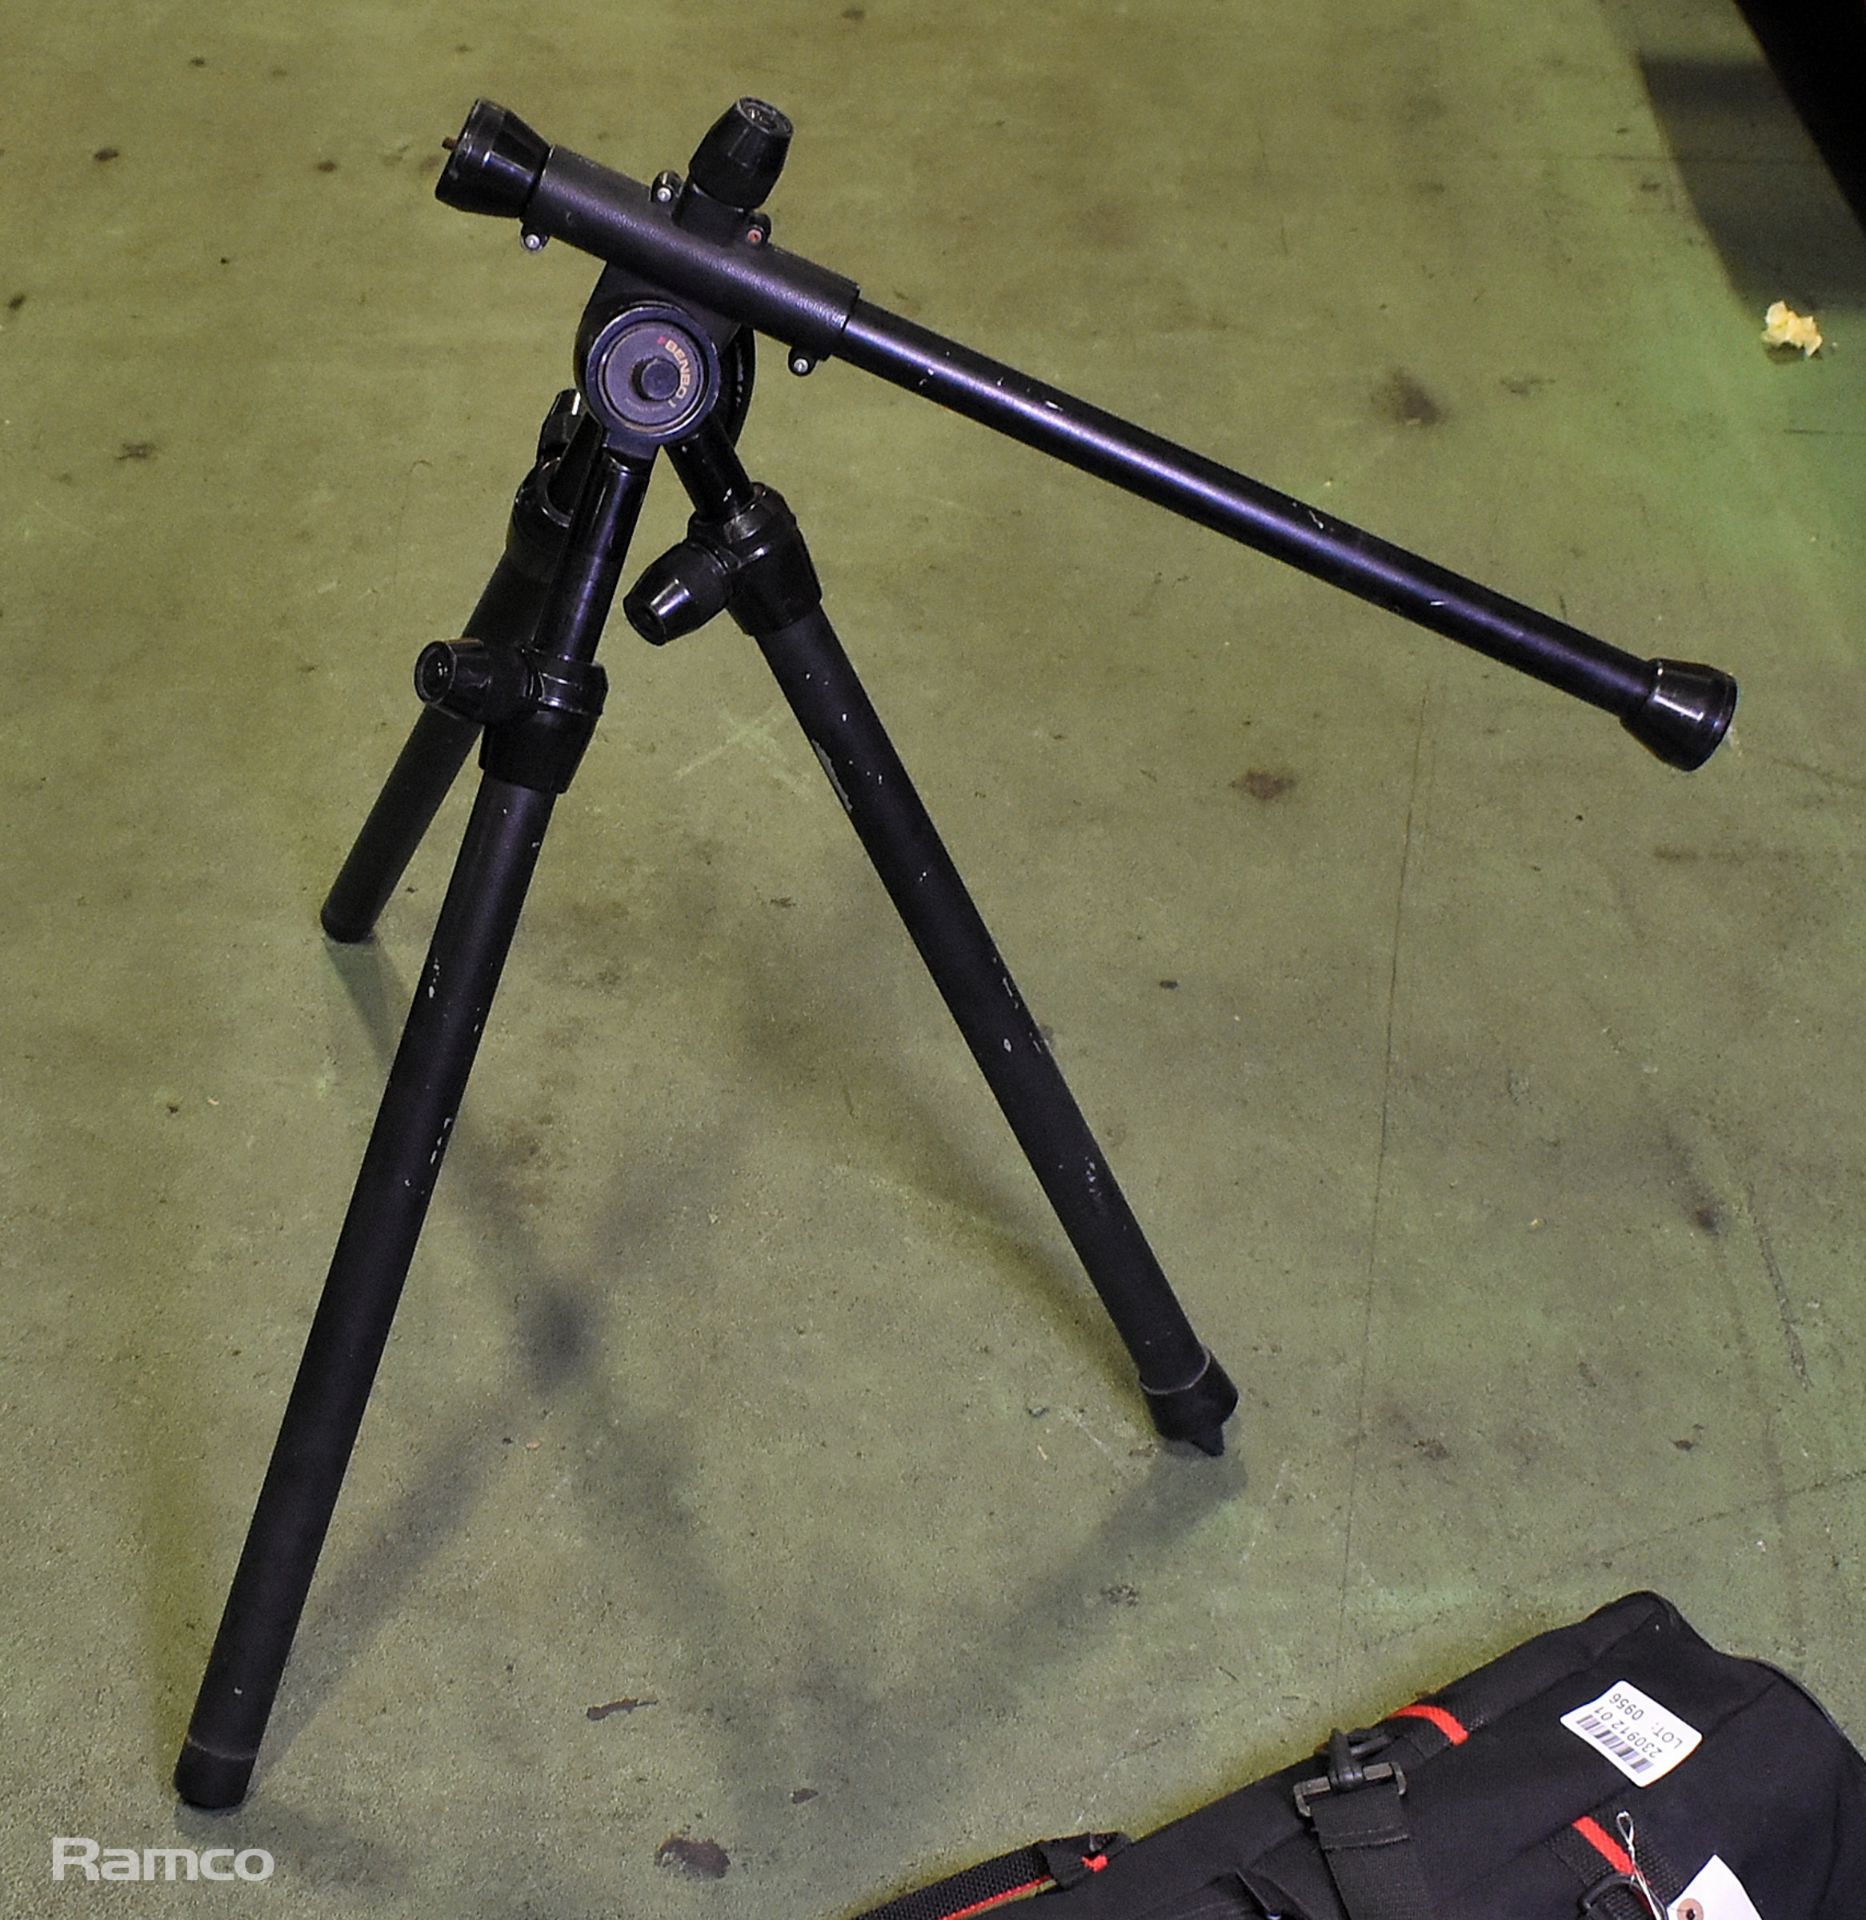 Benbo 1 camera tripod with case - Image 3 of 5